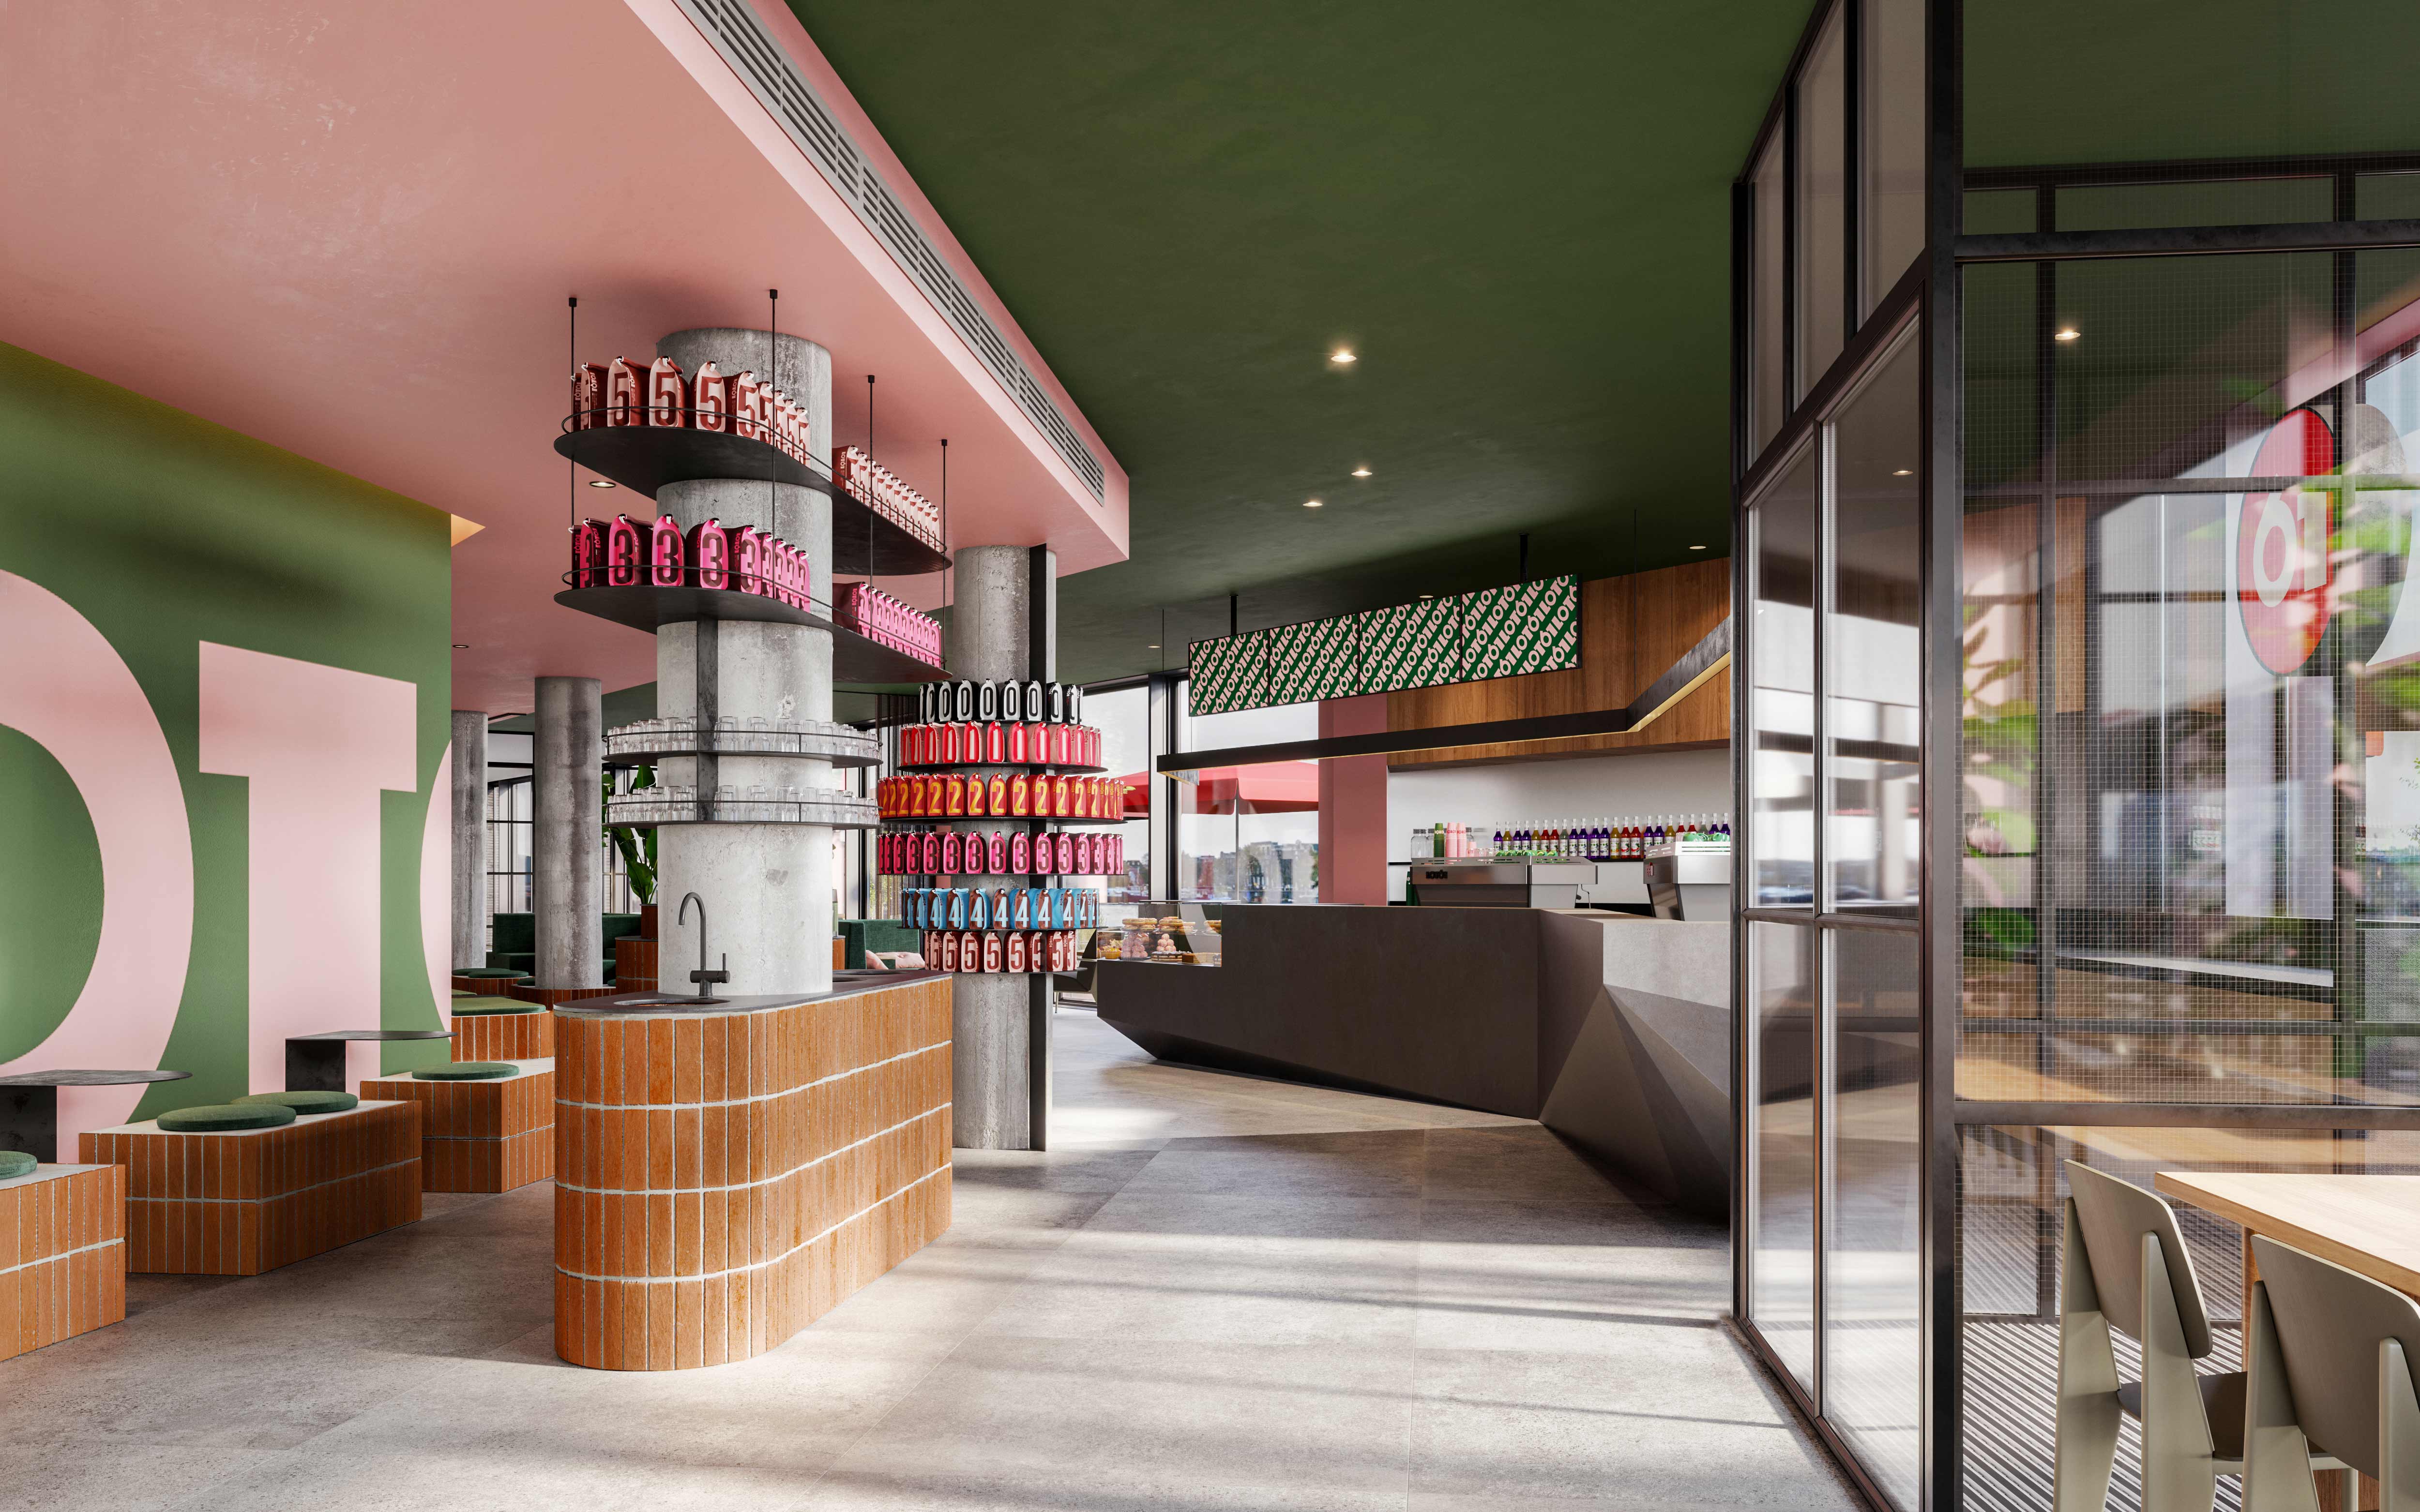 LOT61 opent flagship store in DoubleTree by Hilton Amsterdam Centraal Station